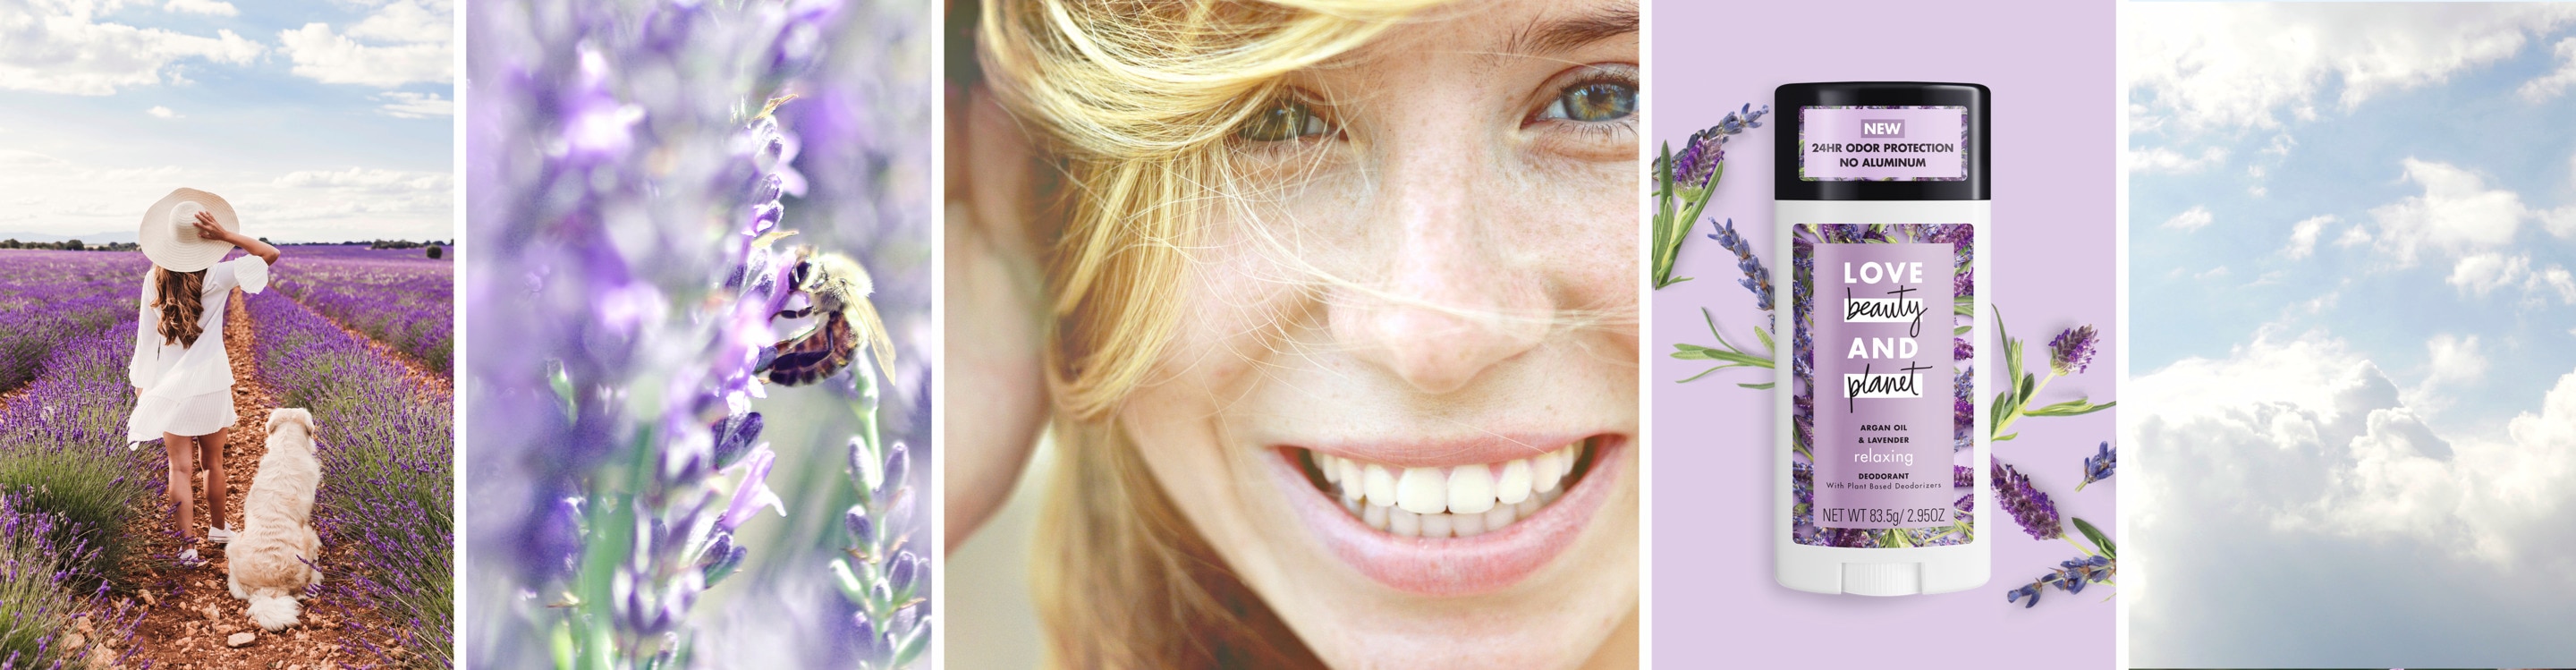 Header Image Love Beauty and Planet Argan Oil Aluminum Free Deodorant Featuring Woman Smiling